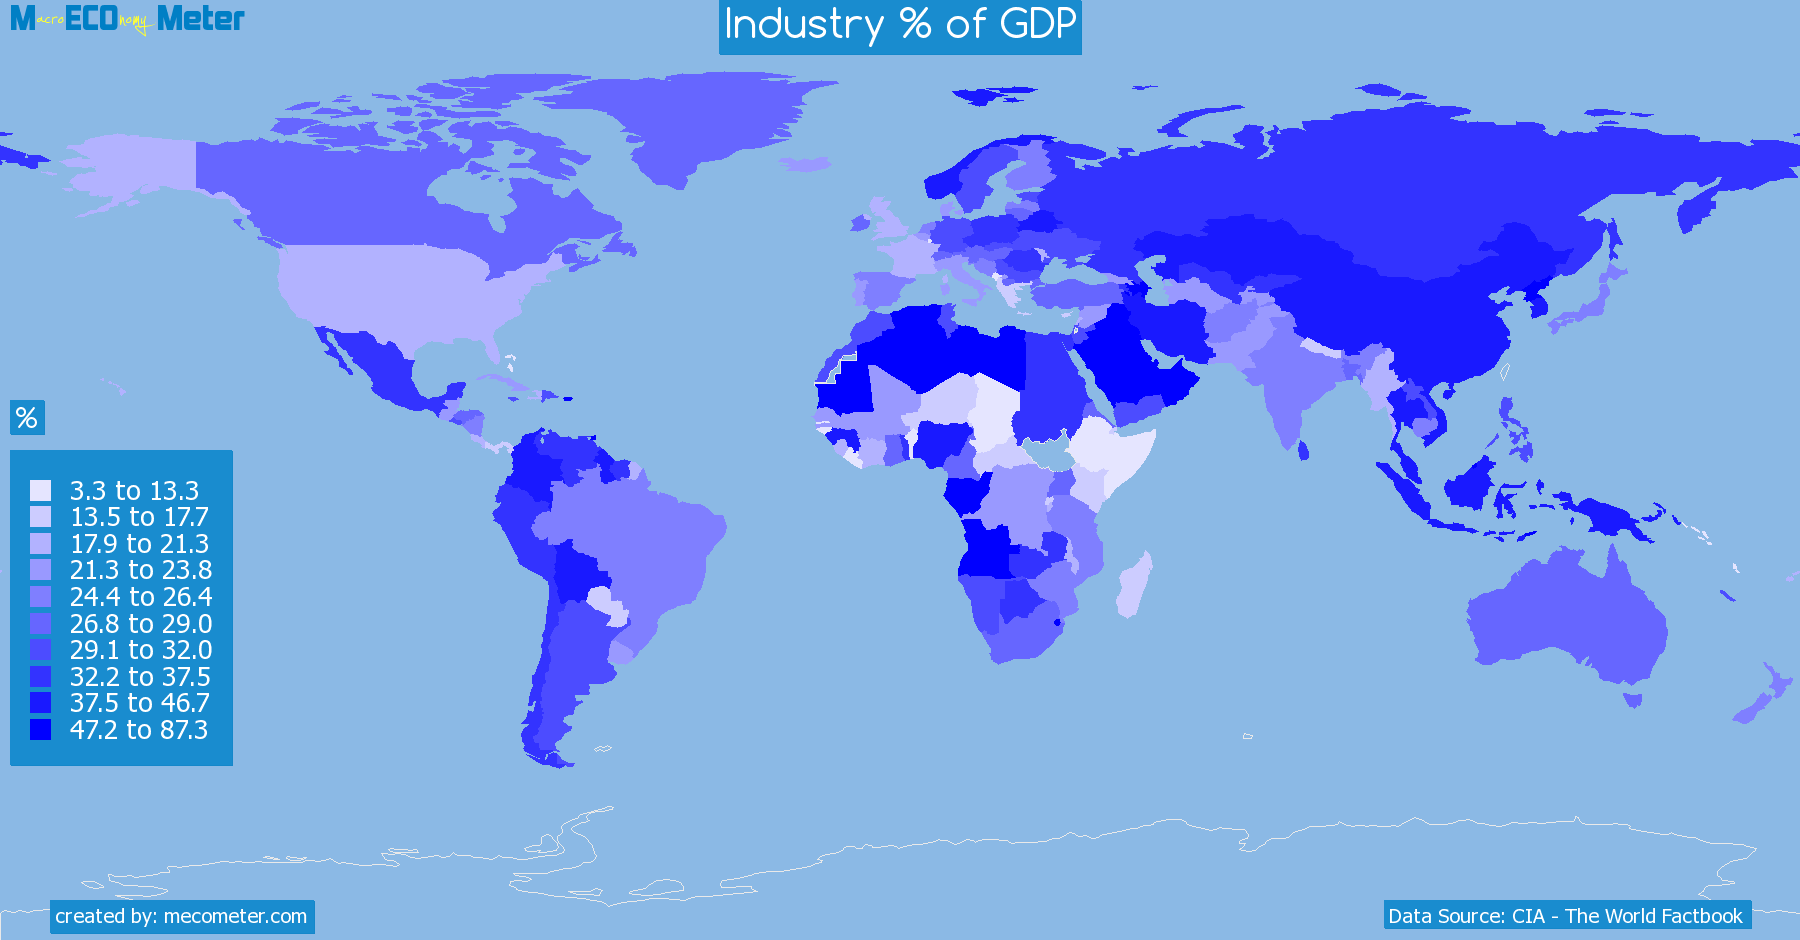 Worldmap of all countries colored to reflect the values of Industry % of GDP